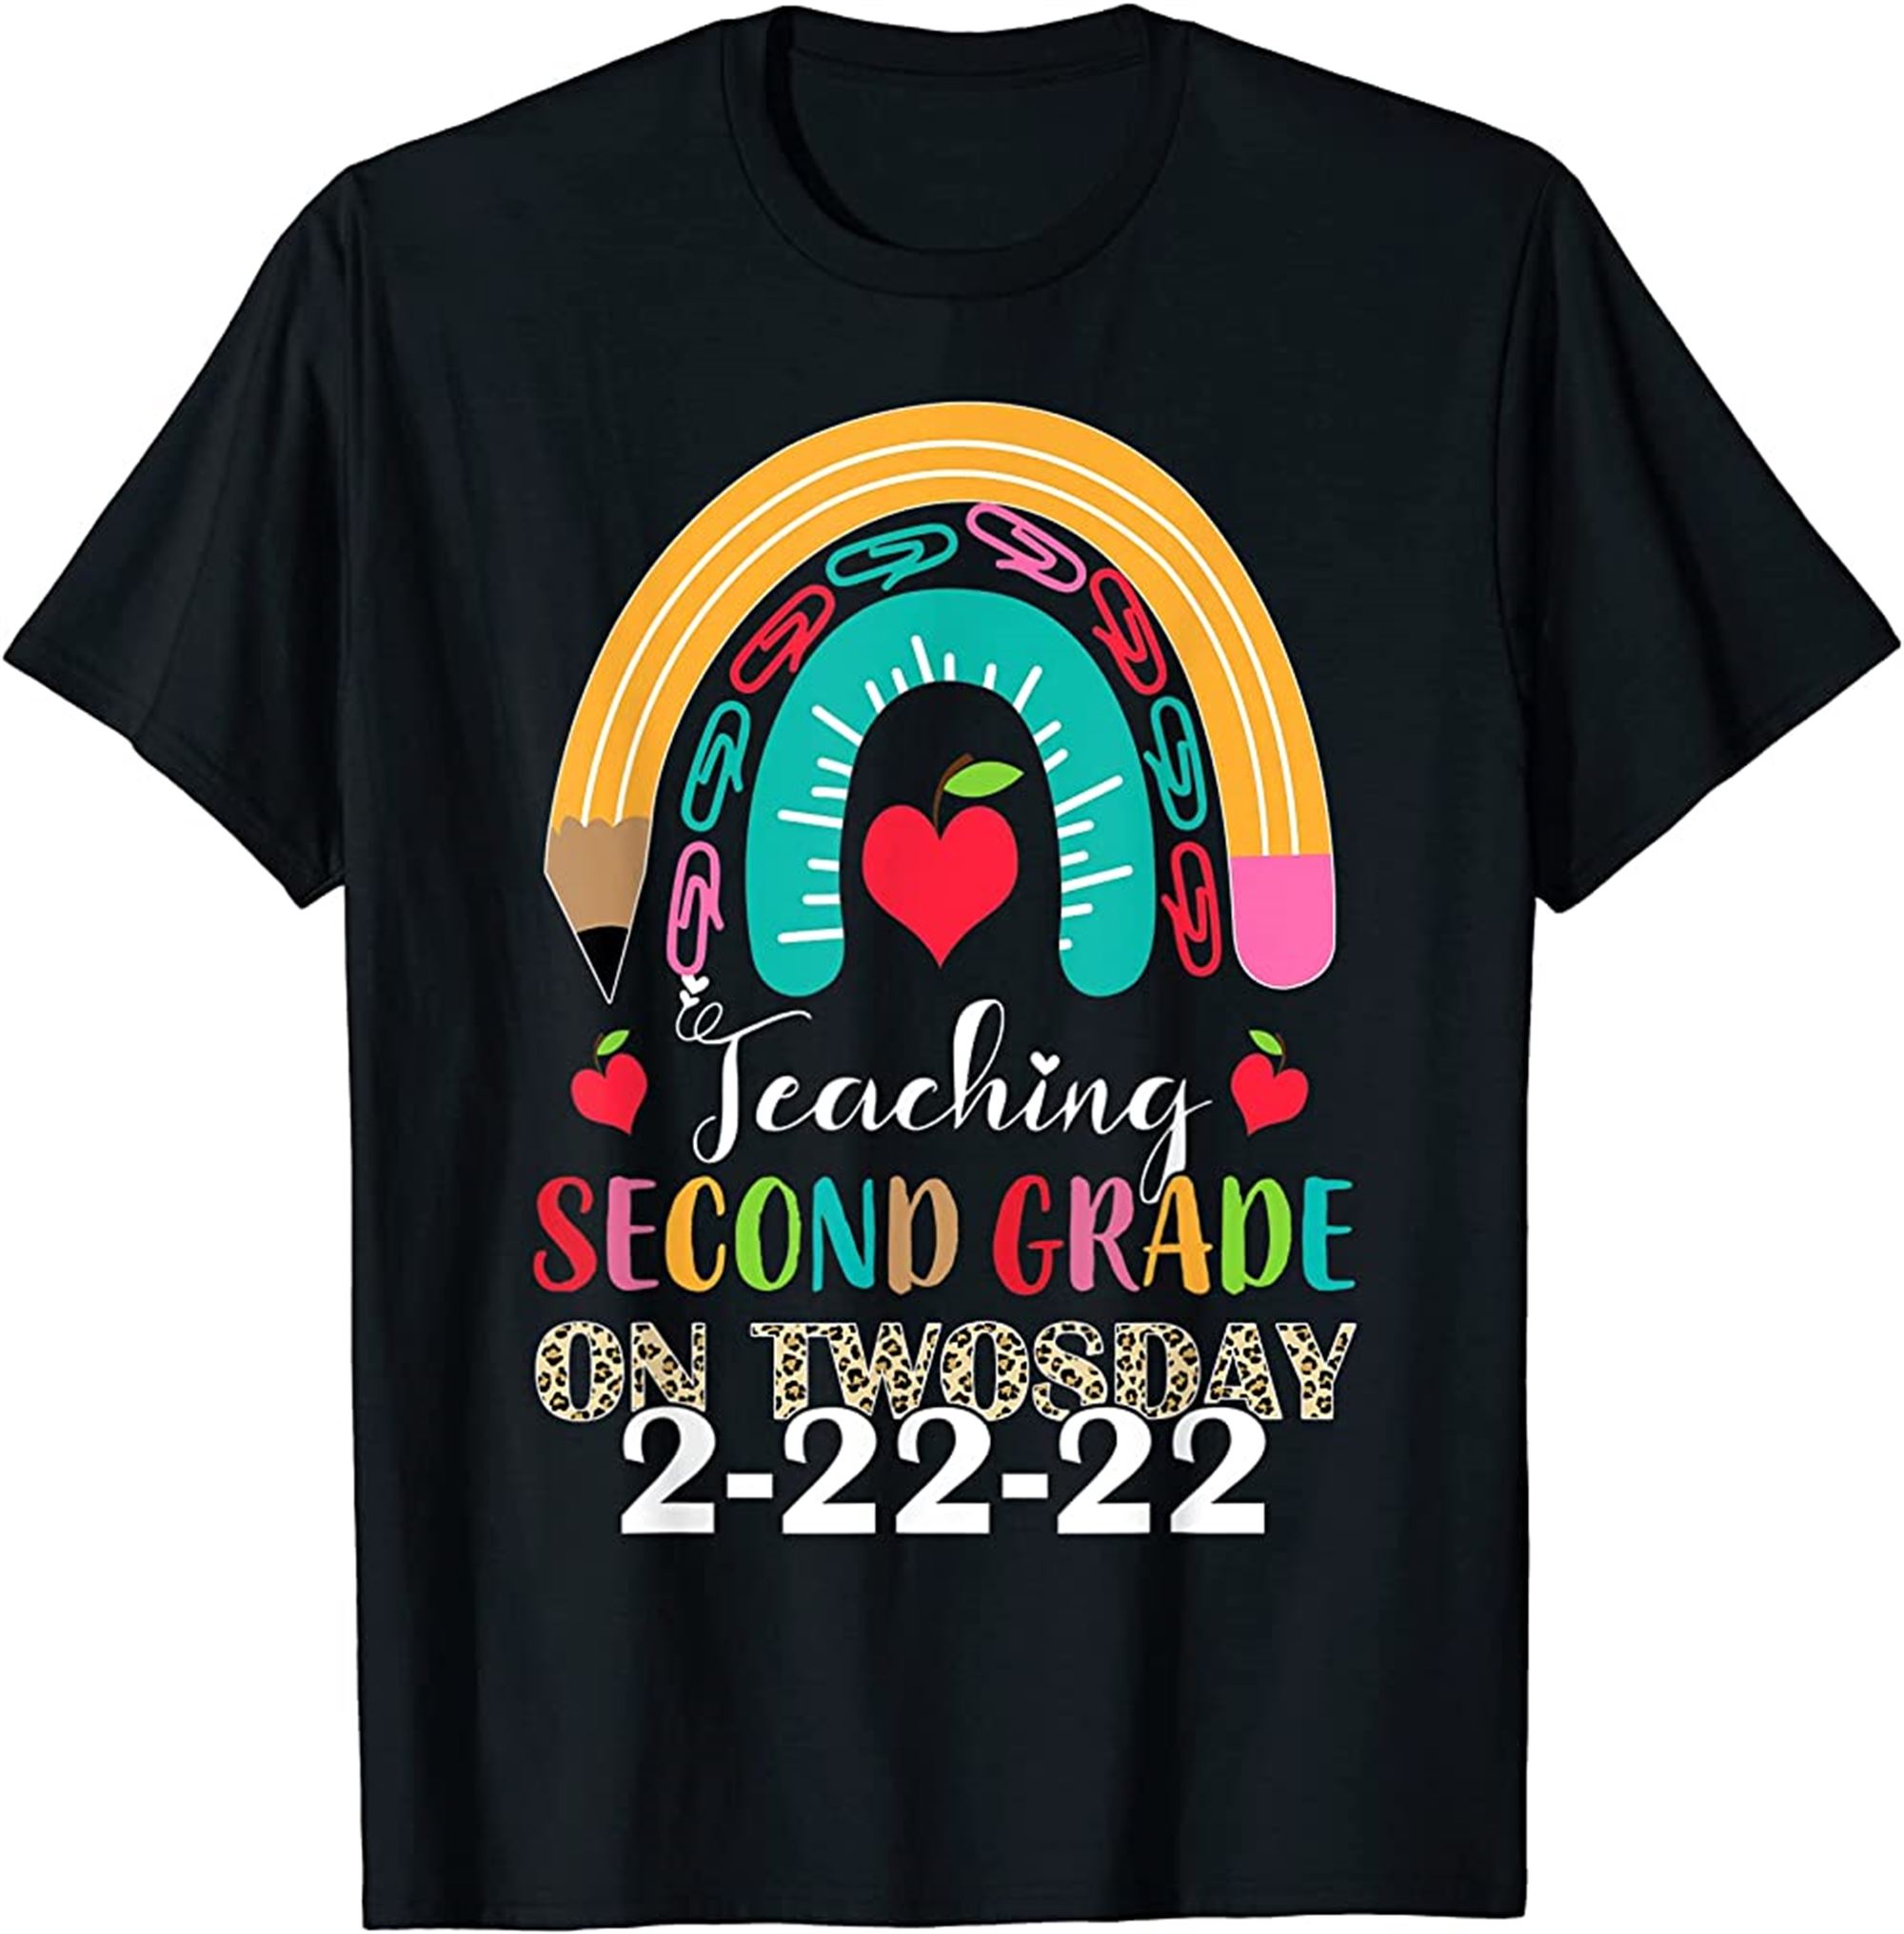 Teaching 2nd Grade Twosday February 2nd 2022 2 22 22 Rainbow Tshirt Full Size Up To 5xl